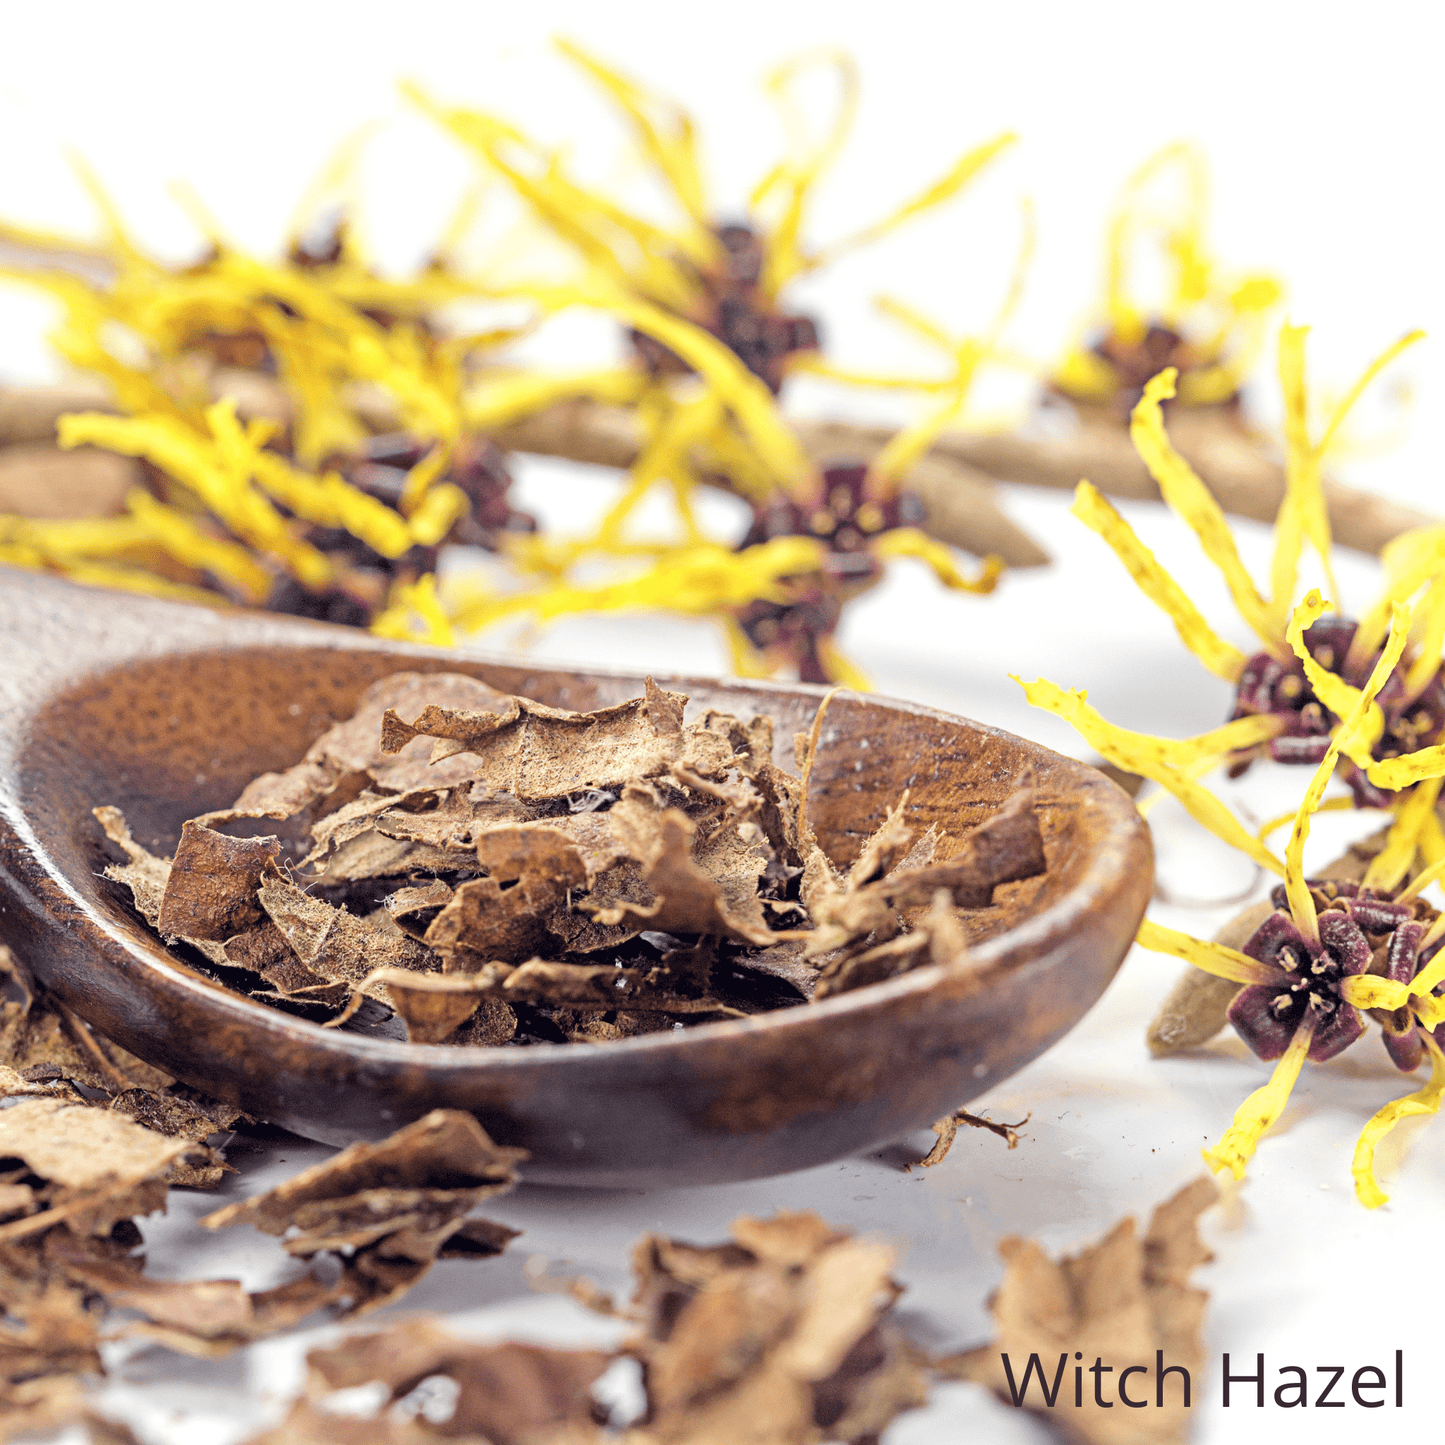 Be Green Bath and Body Shaving Foam contains witch hazel